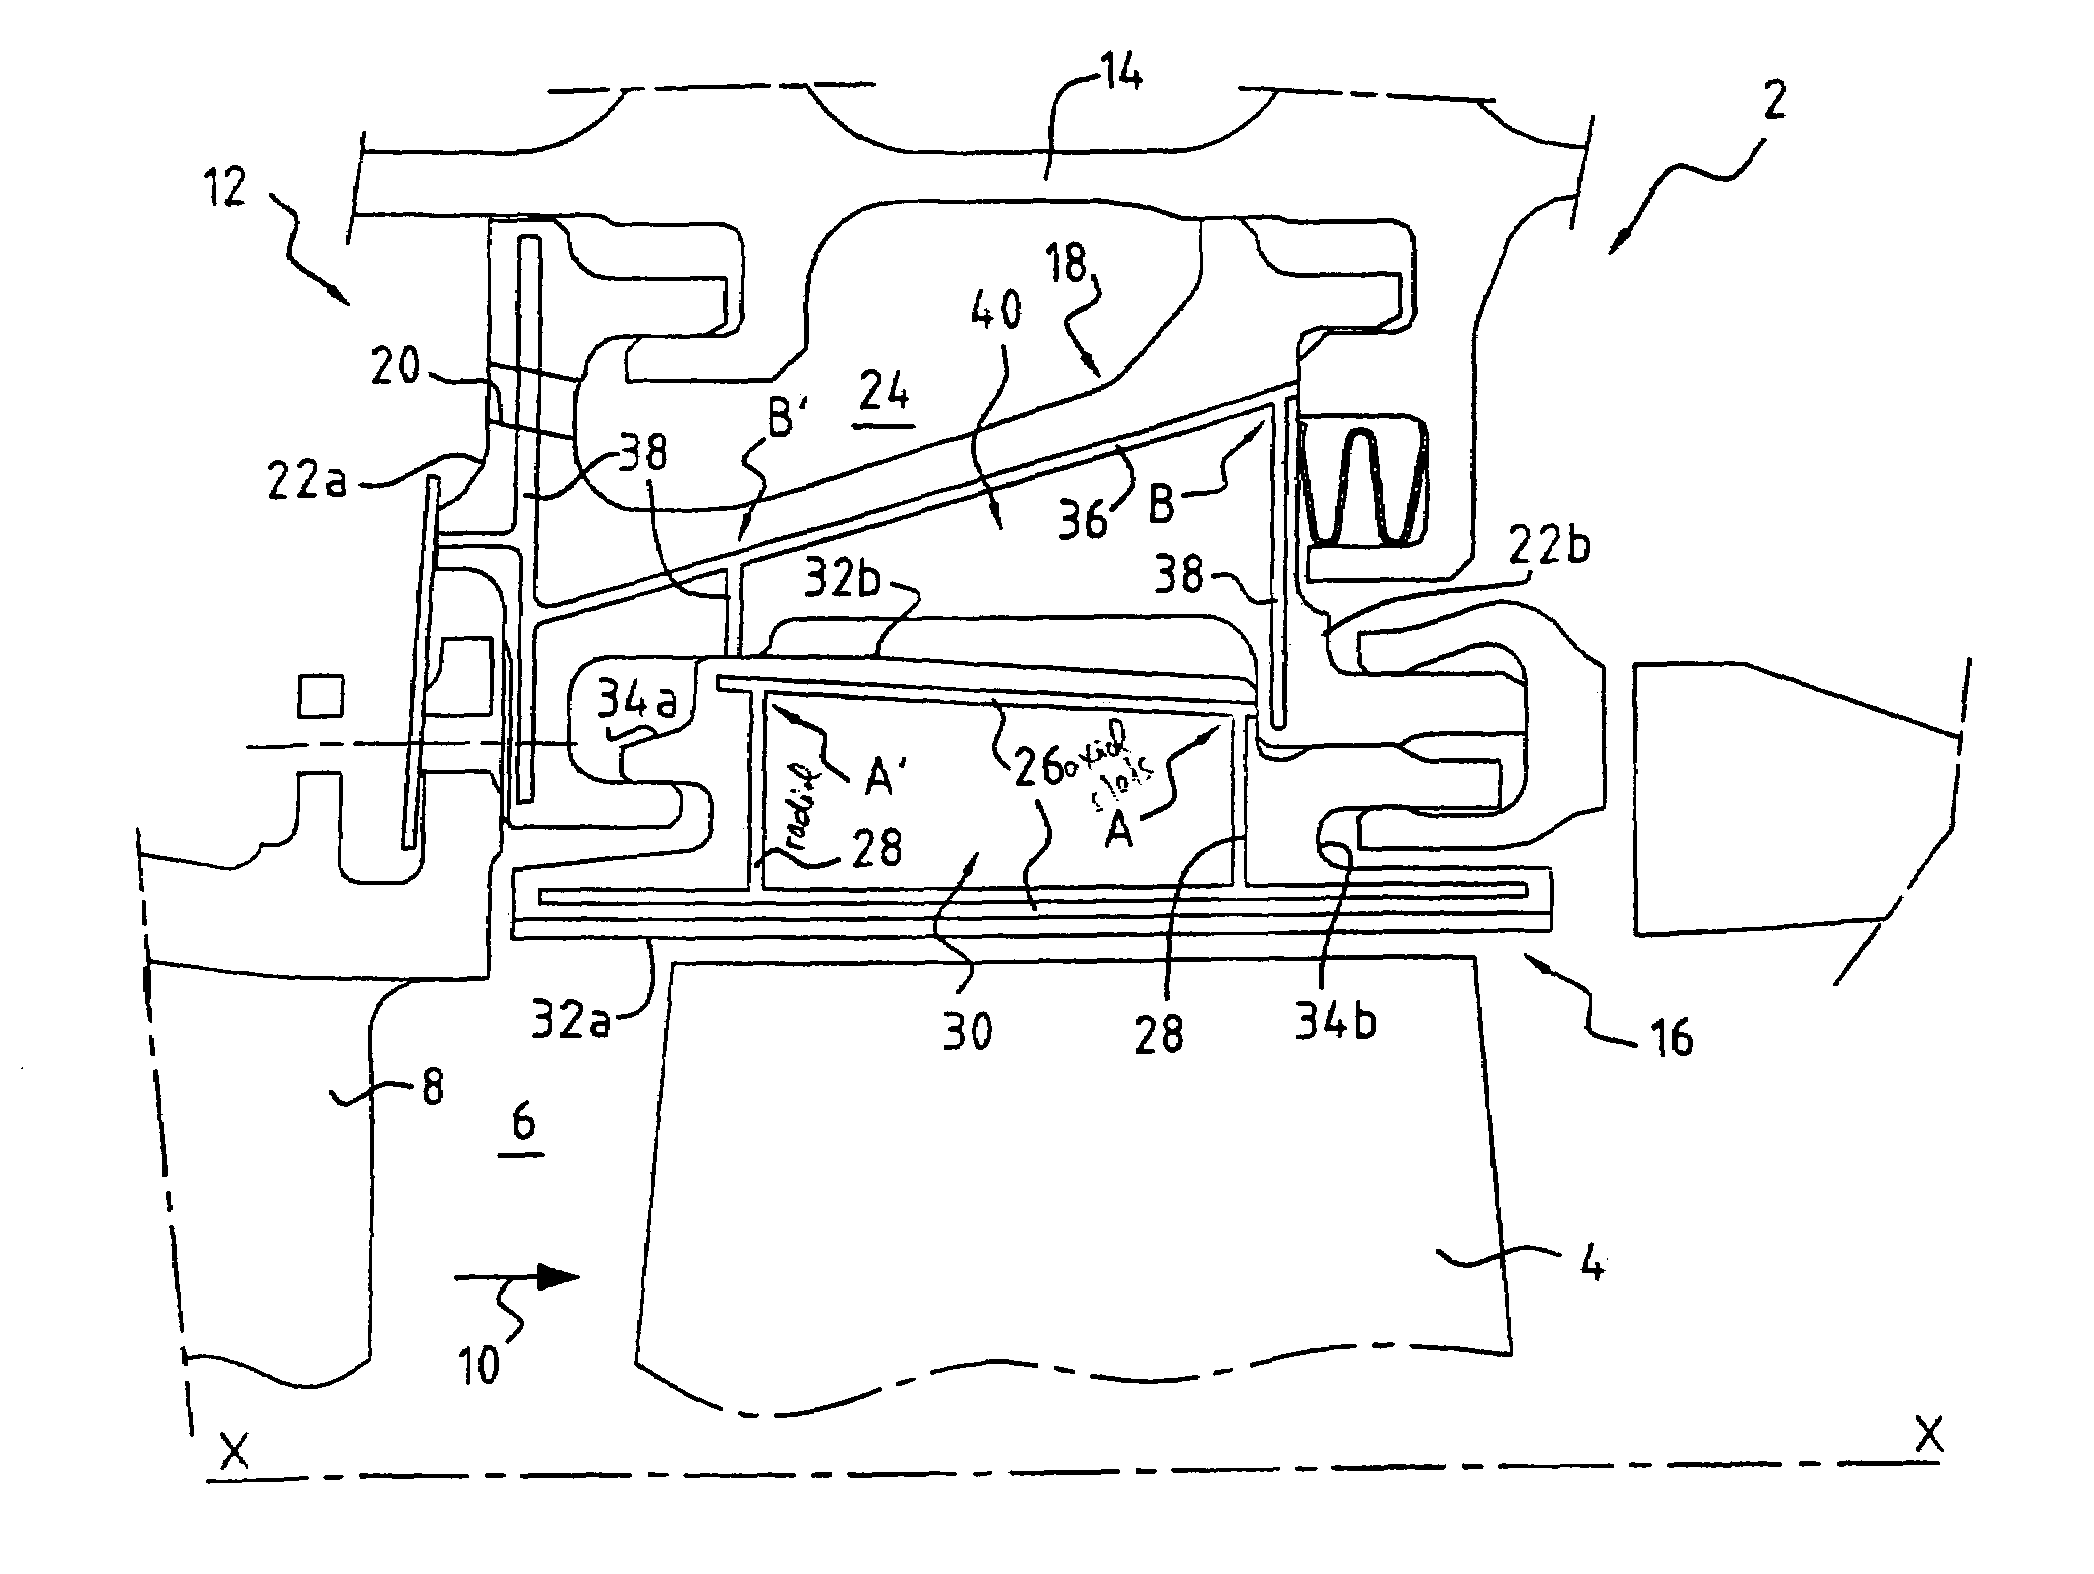 Stationary ring assembly for a gas turbine